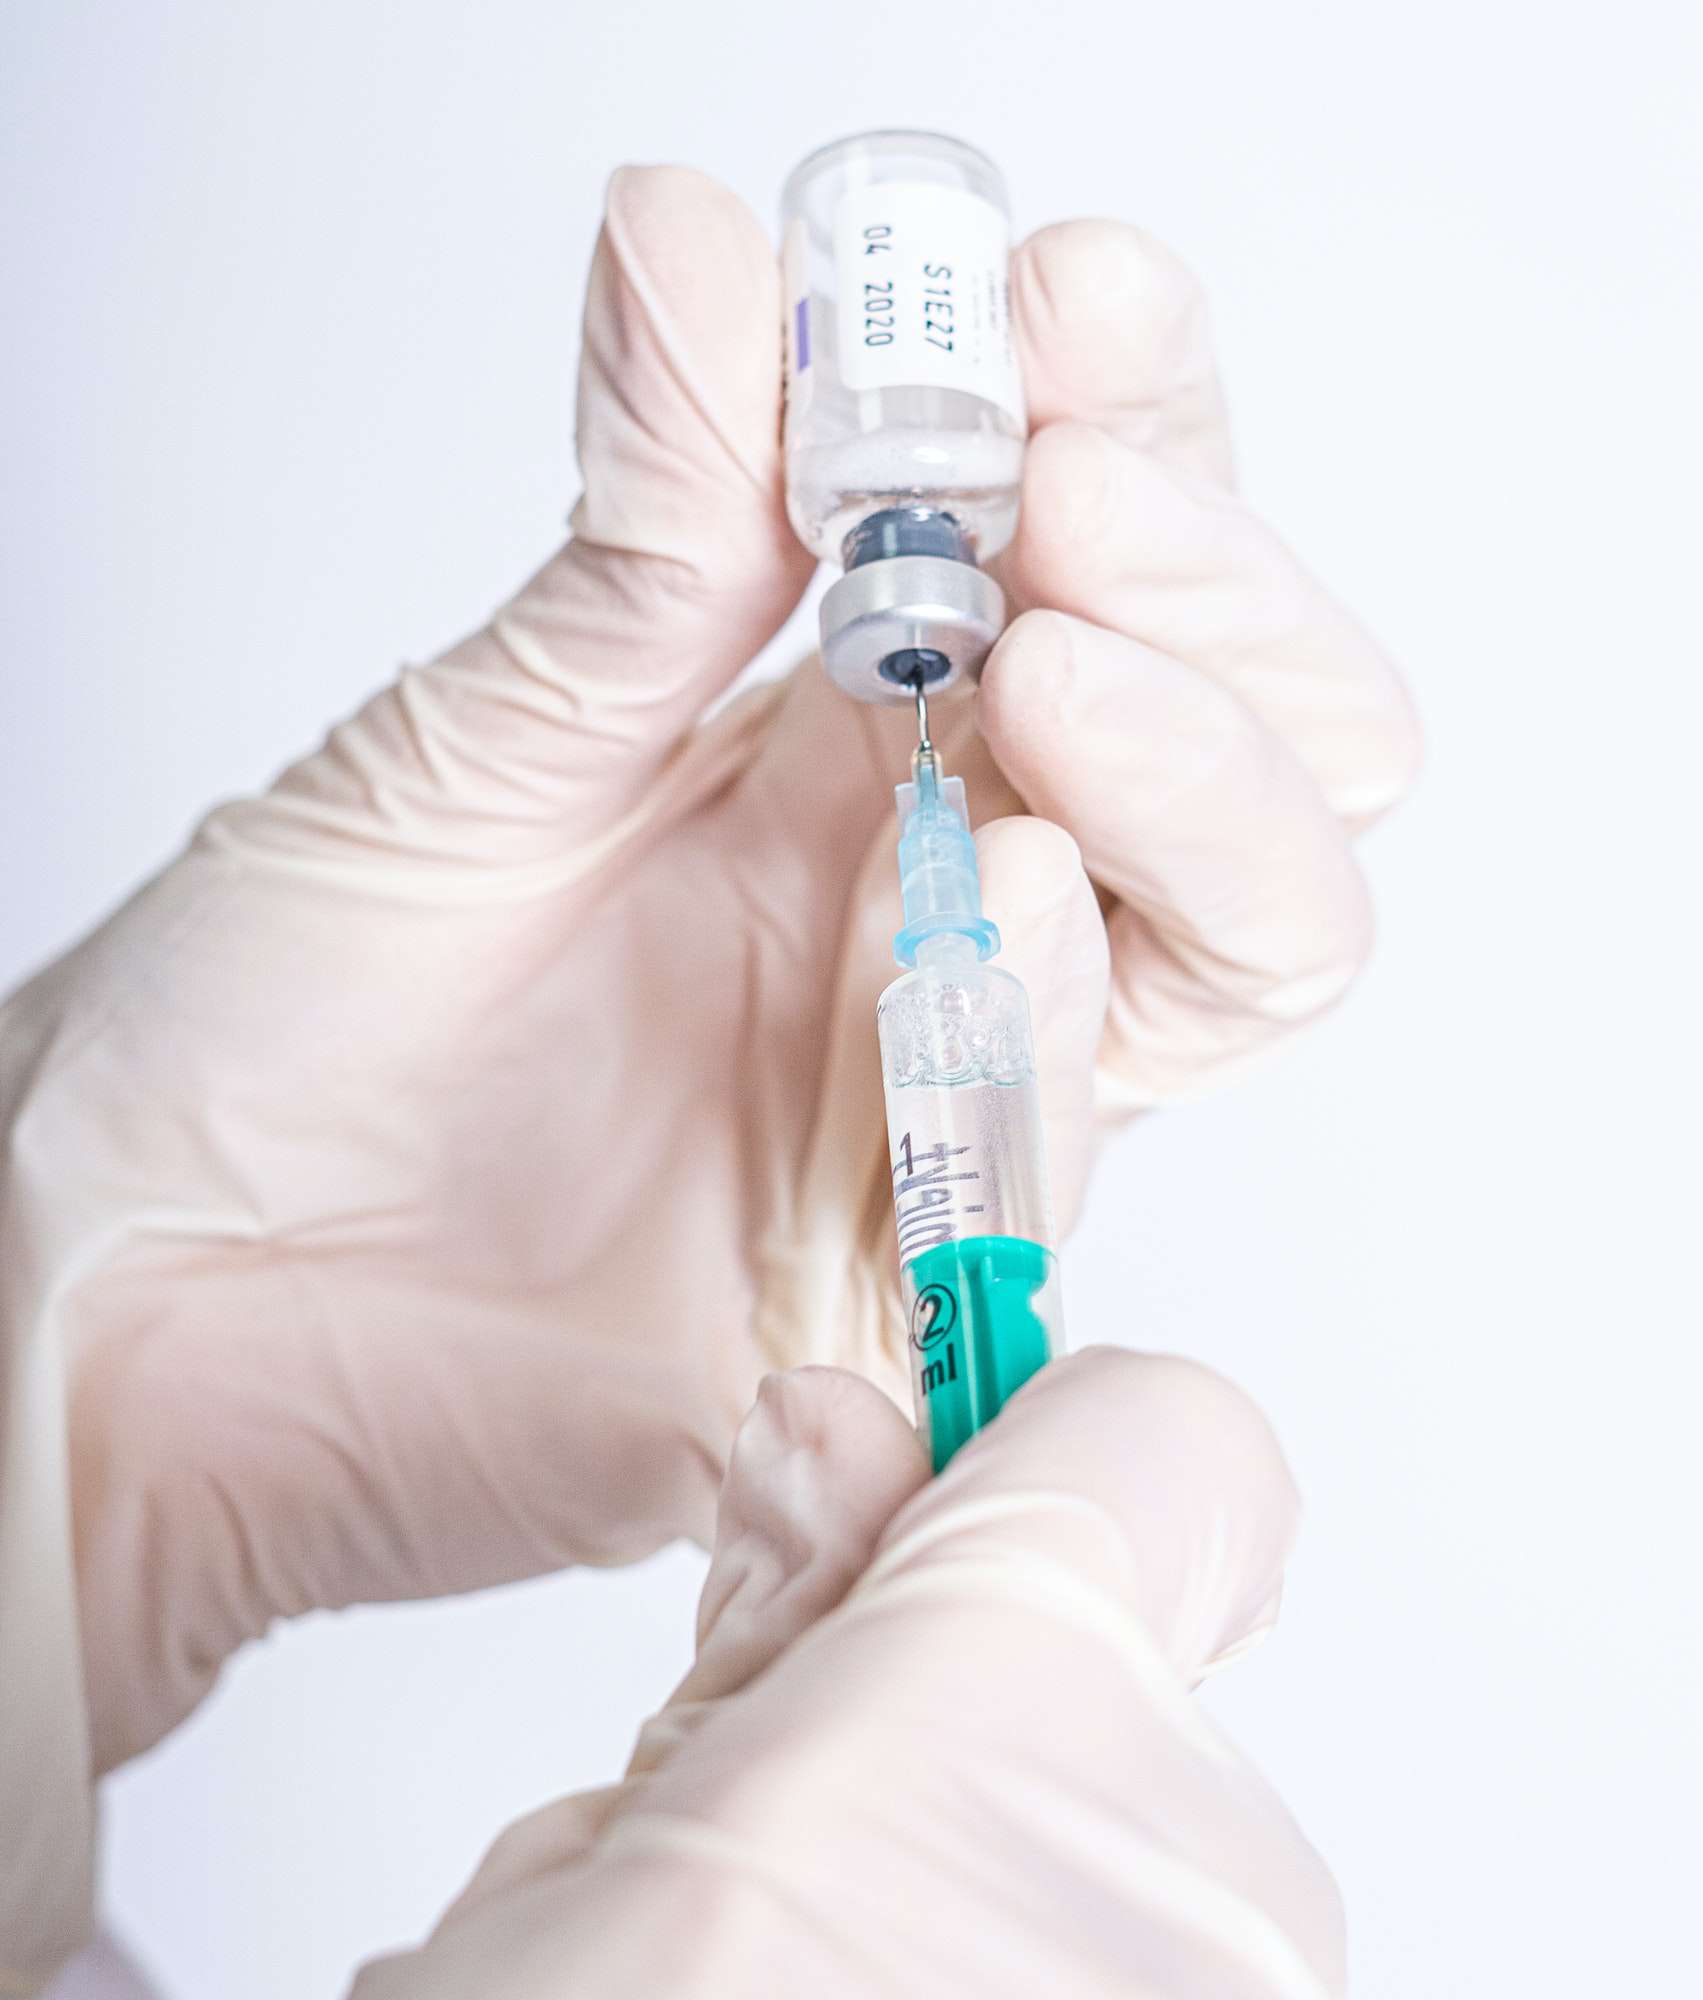 Selective focus shot of a hand holding an injection syringe with peptides